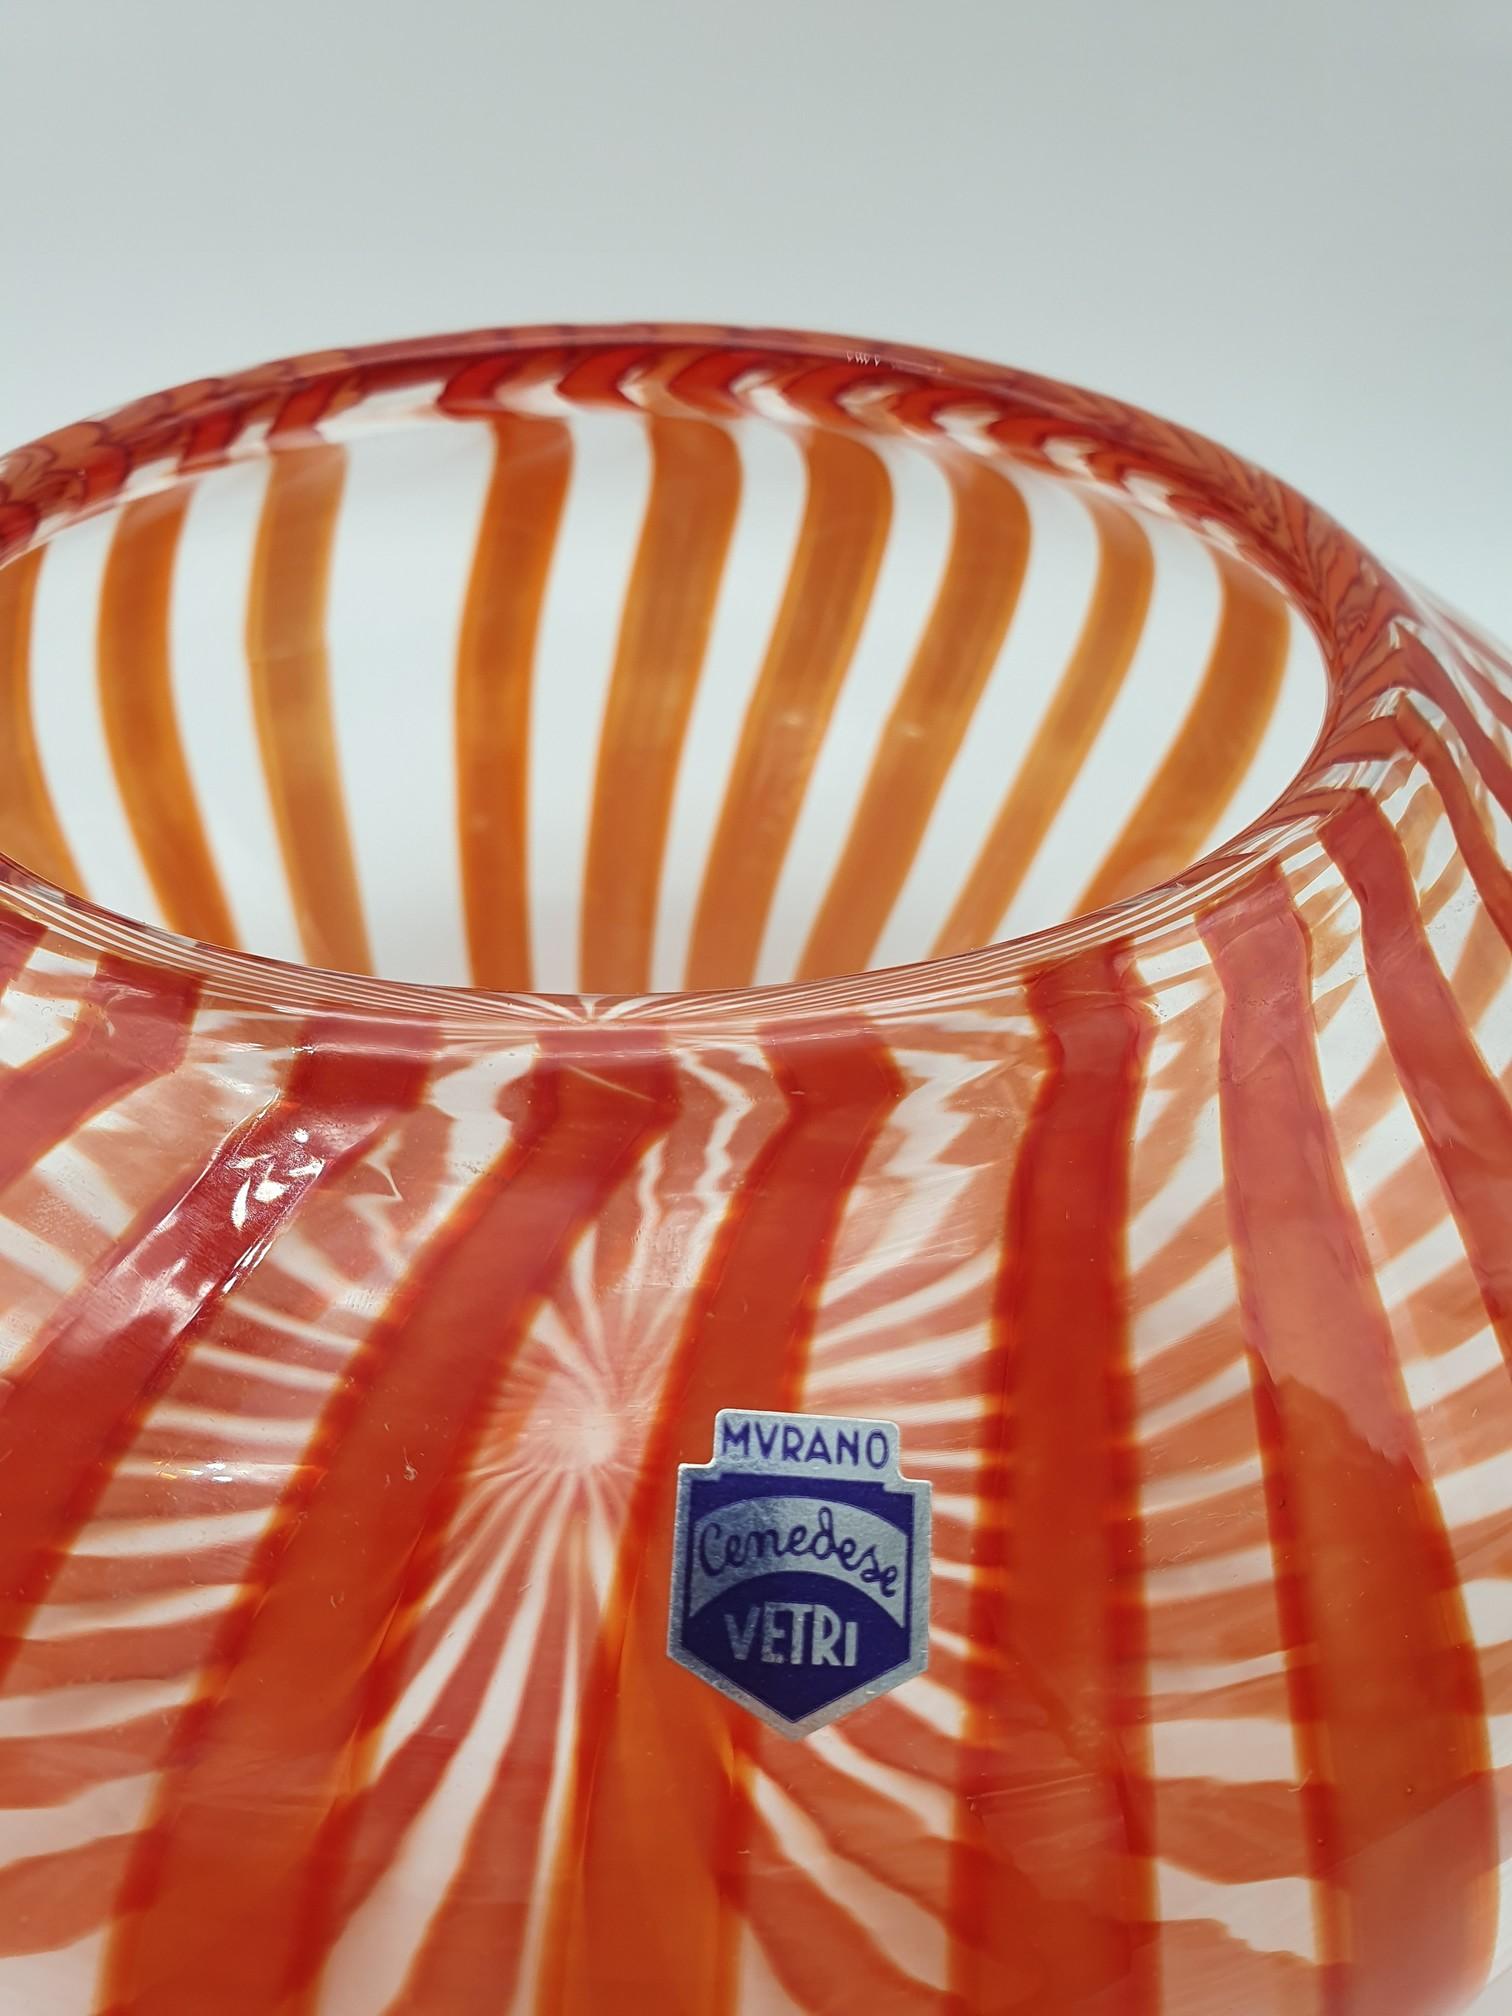 Italian Modern Murano Glass Bowl with Red Canes by Gino Cenedese, 1998 For Sale